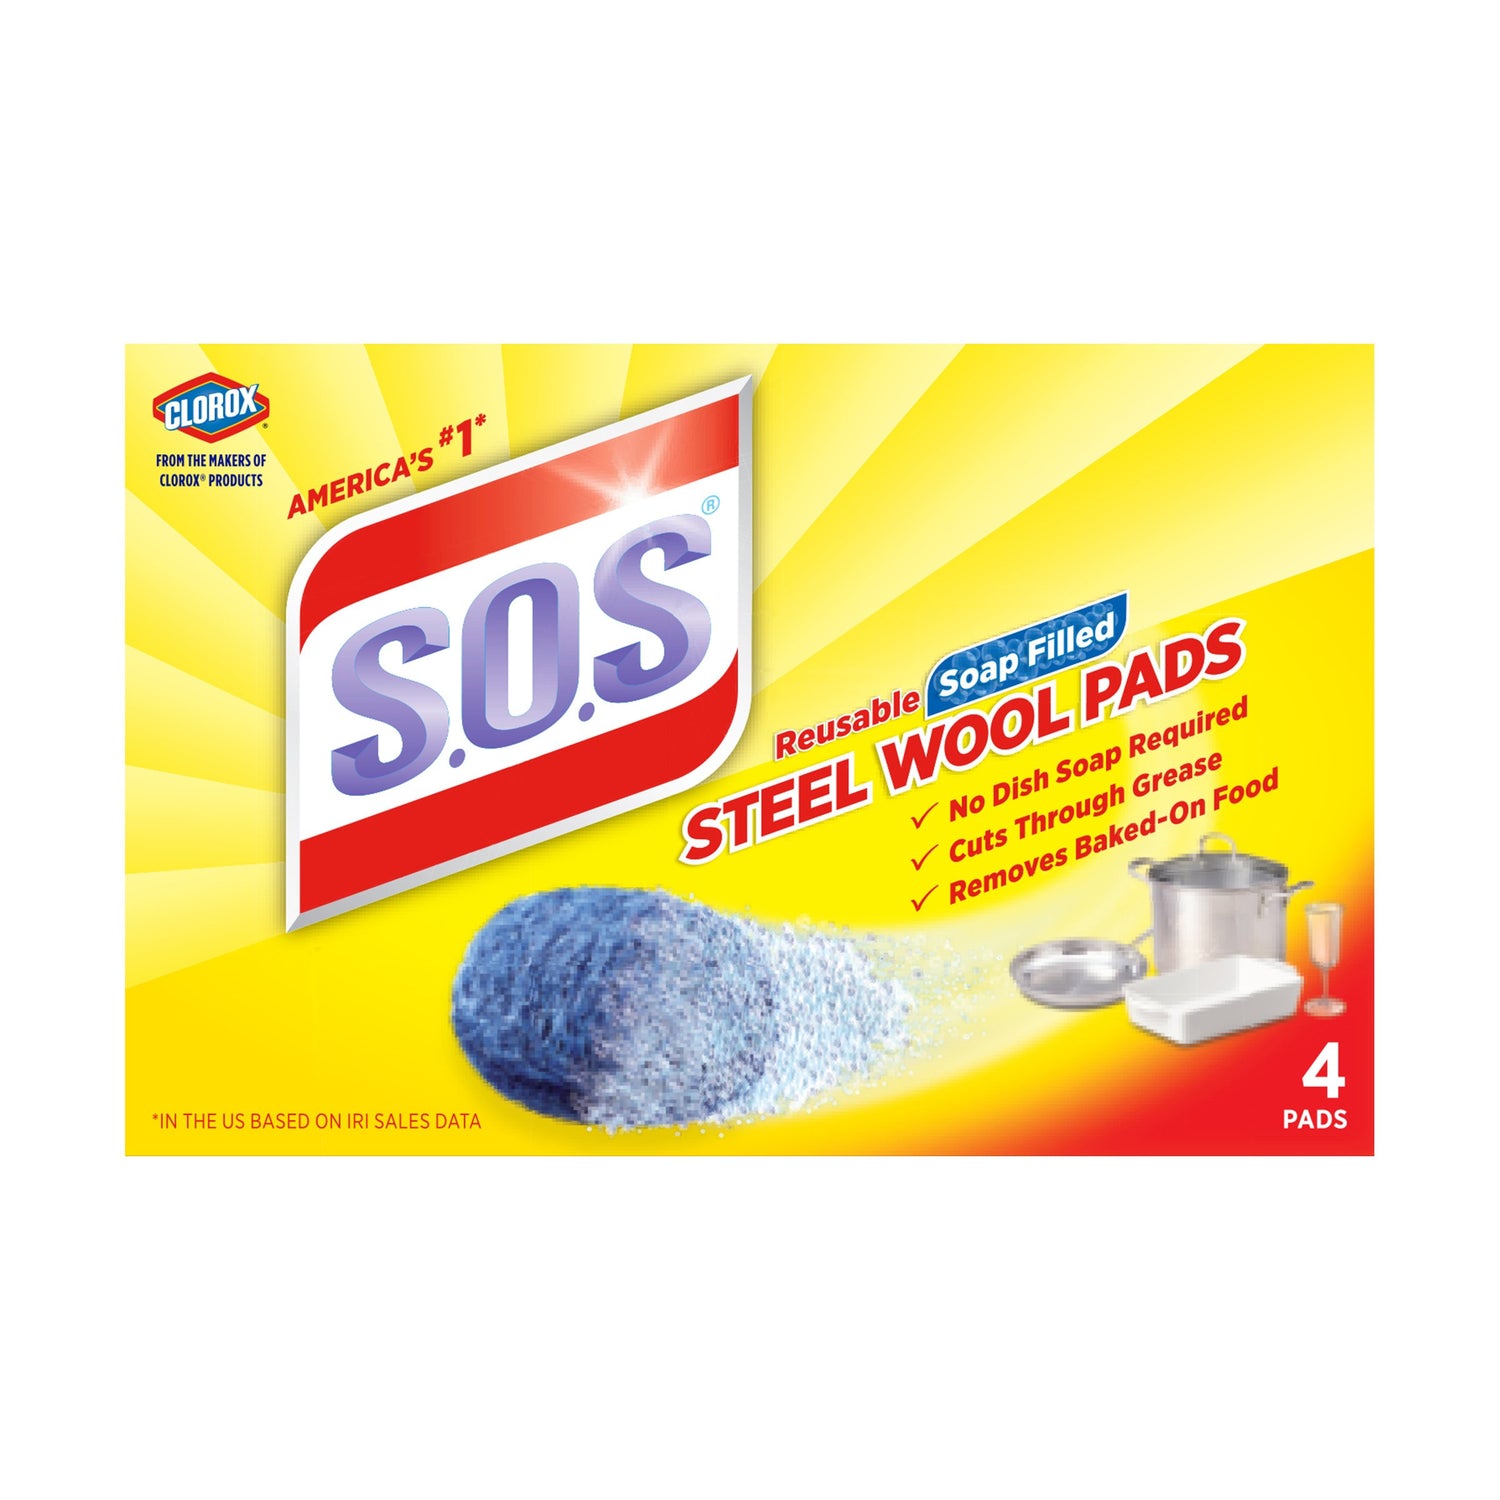 Clorox S.O.S Reusable Soap Filled Steel Wool Pads 4 Pads 24 Count